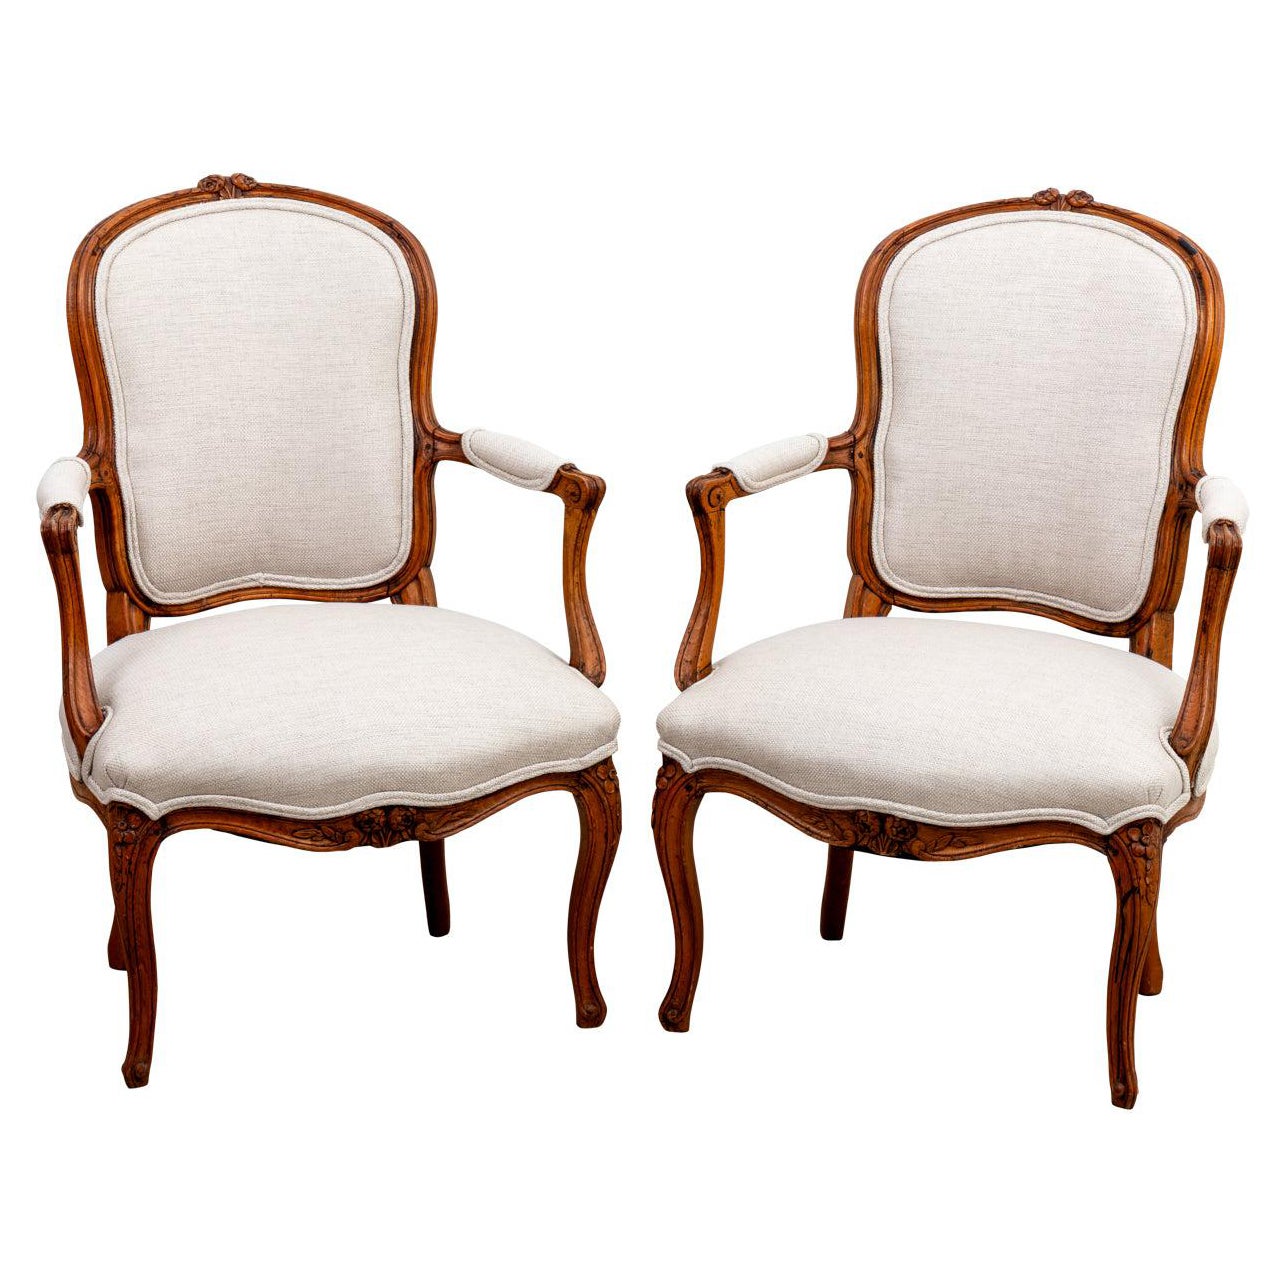 Pair of Louis XV style fruitwood armchairs